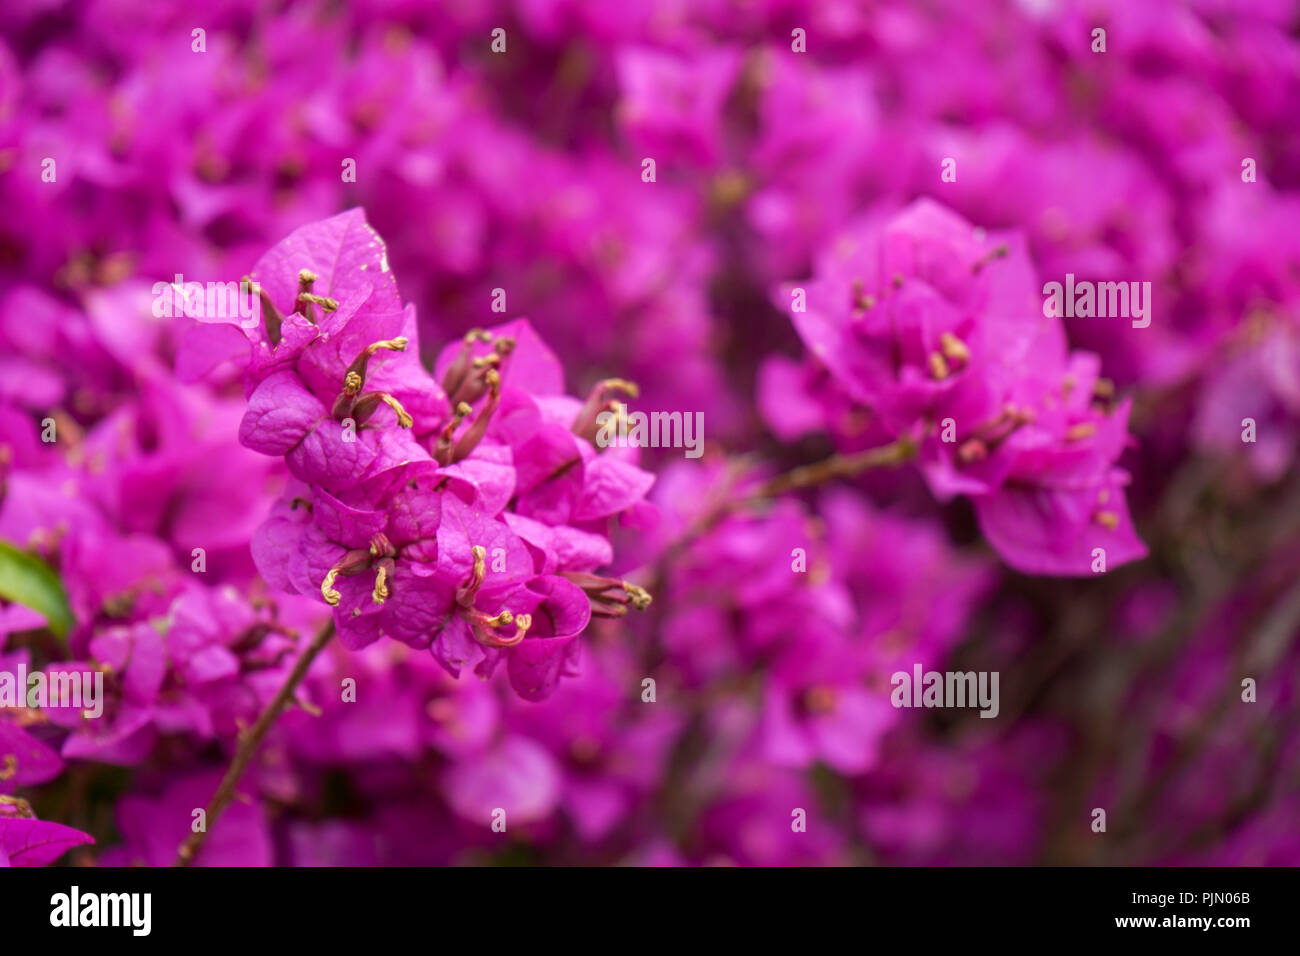 pink summer flower close up view with colorful leaves, bougainvillea nyctaginaceae Stock Photo